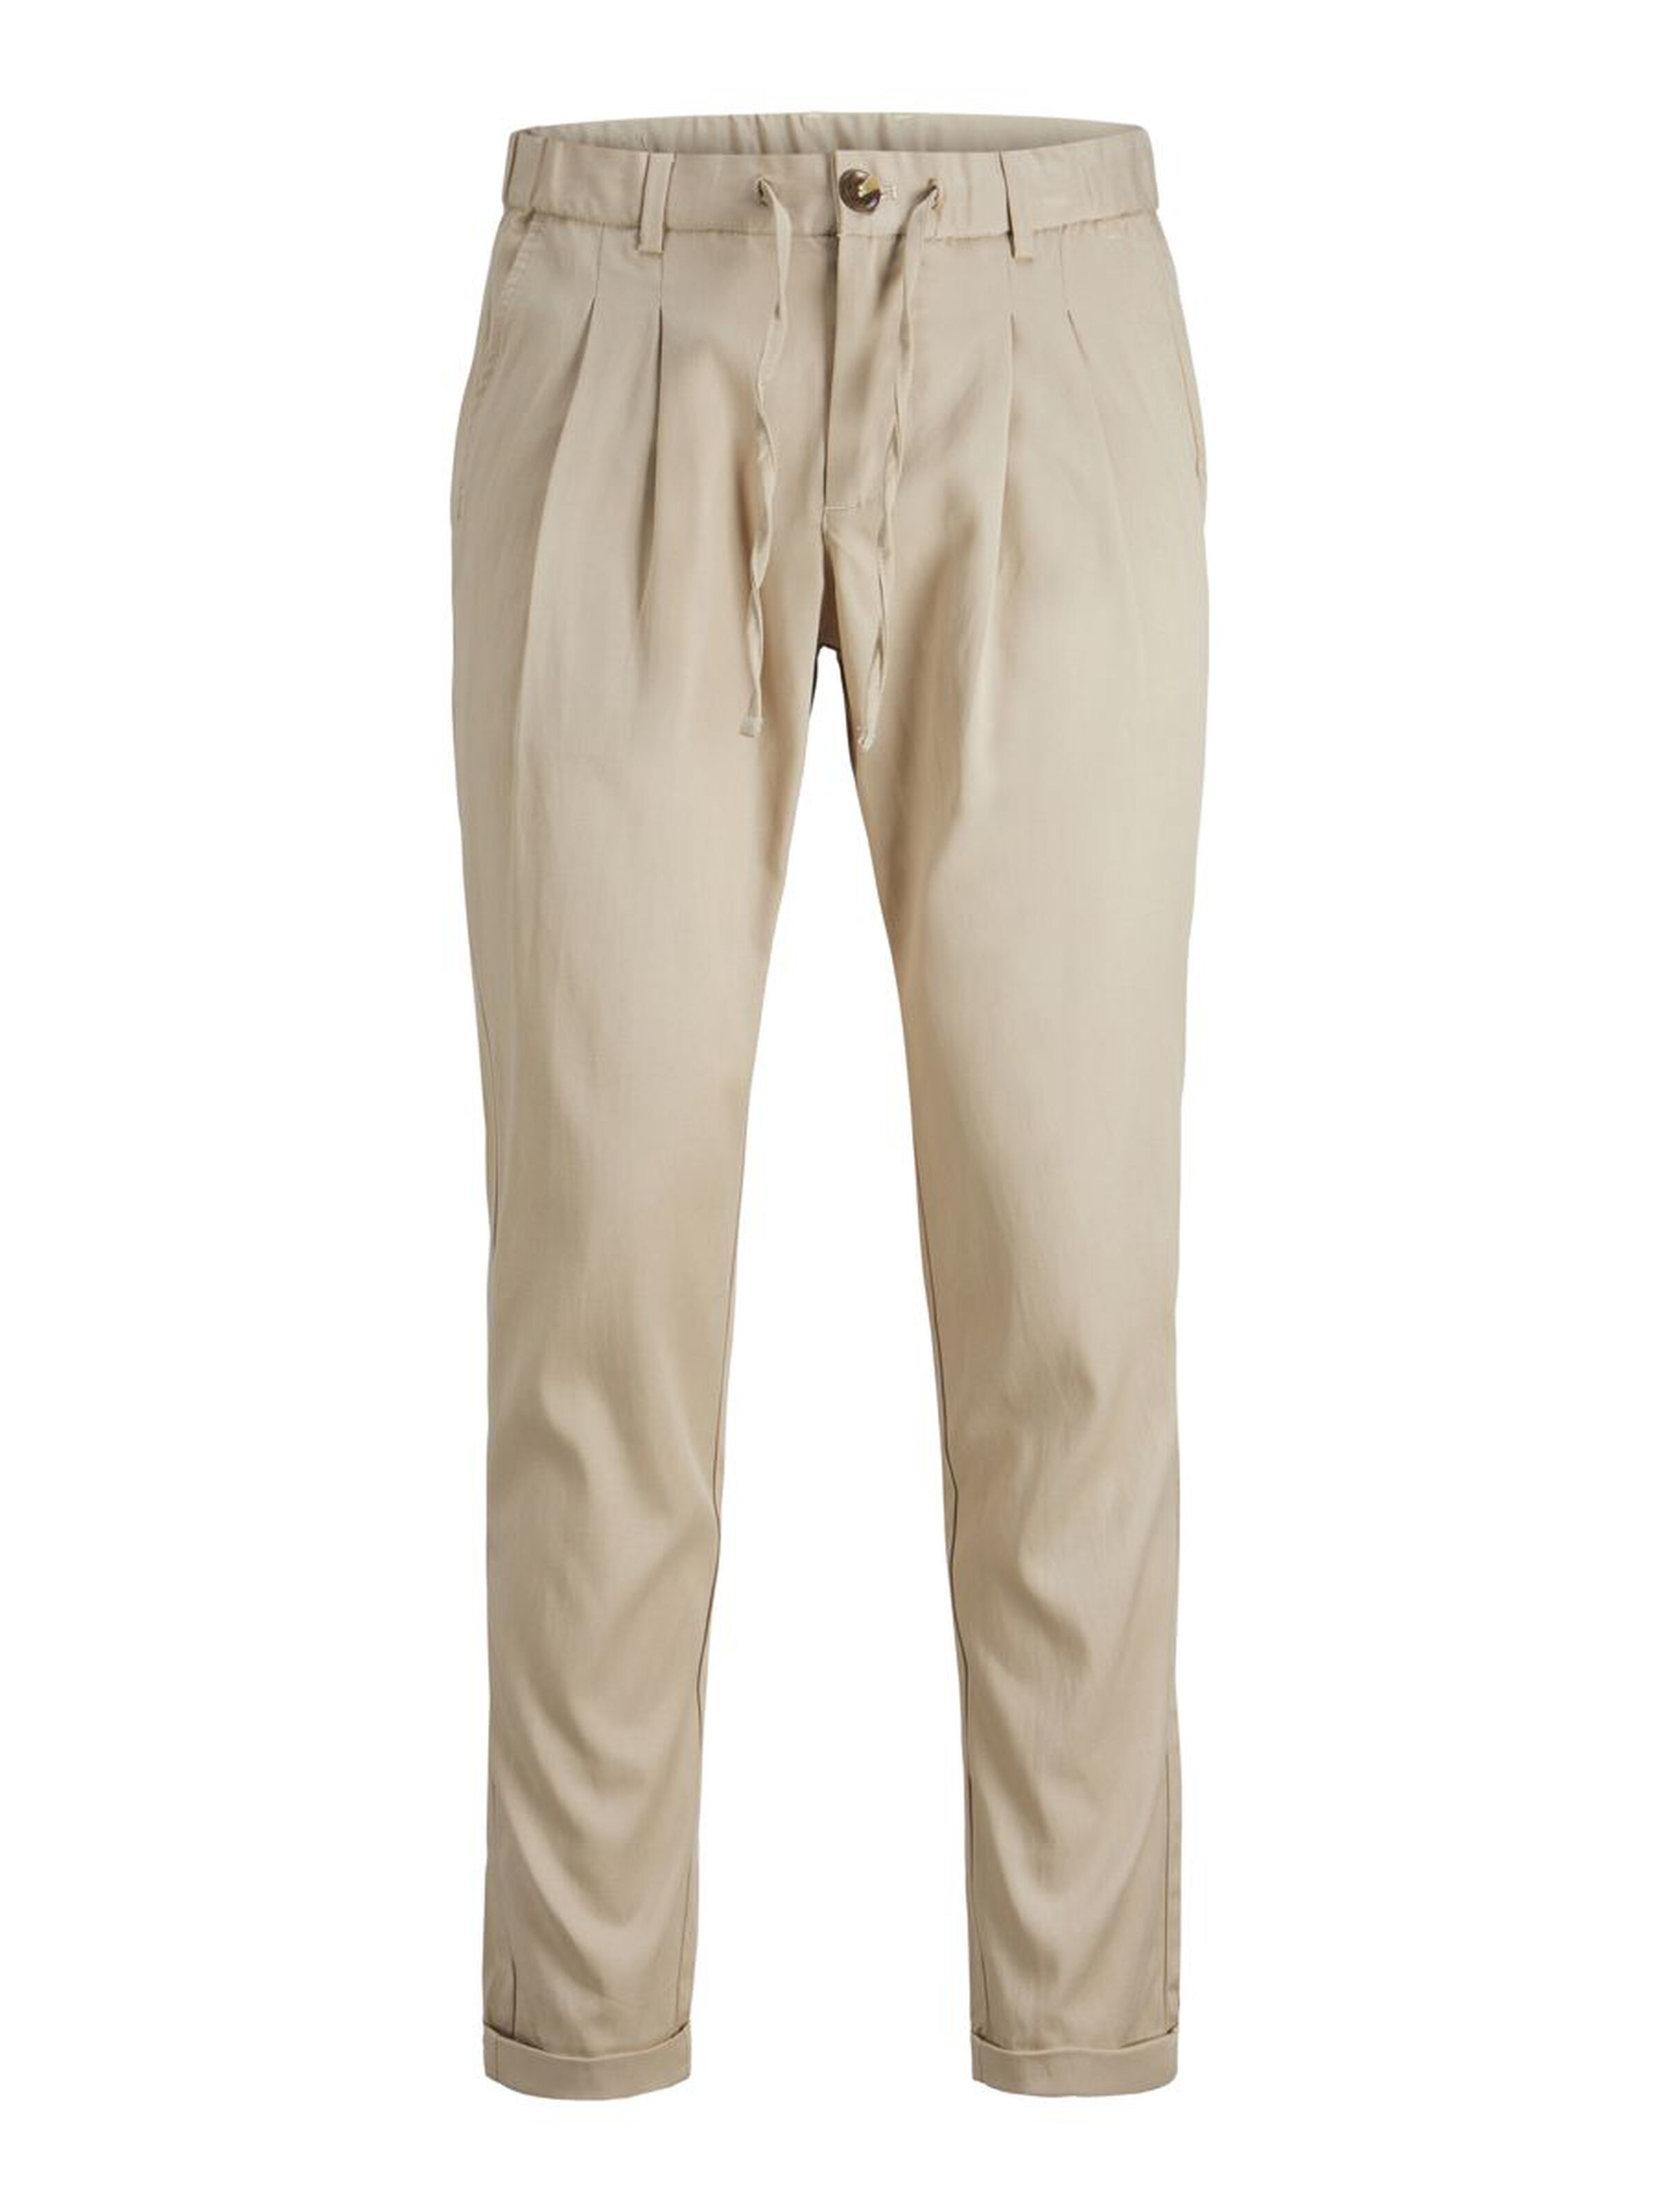 regular fit chinos trousers - beige/oxford tan